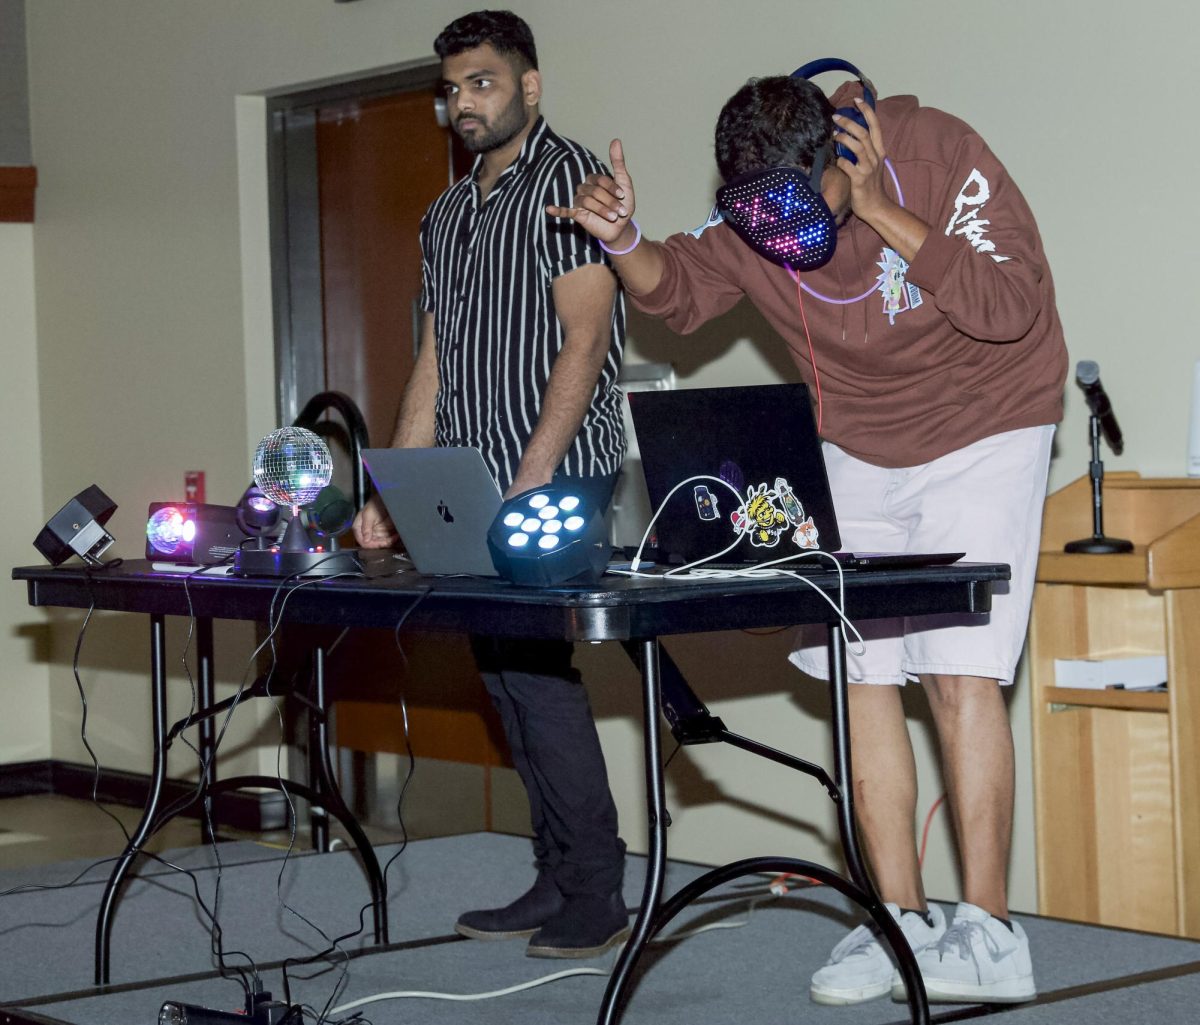 The DJ for Bollywood Night selects songs for students and members of the Association of Hindu Students In America to dance to.